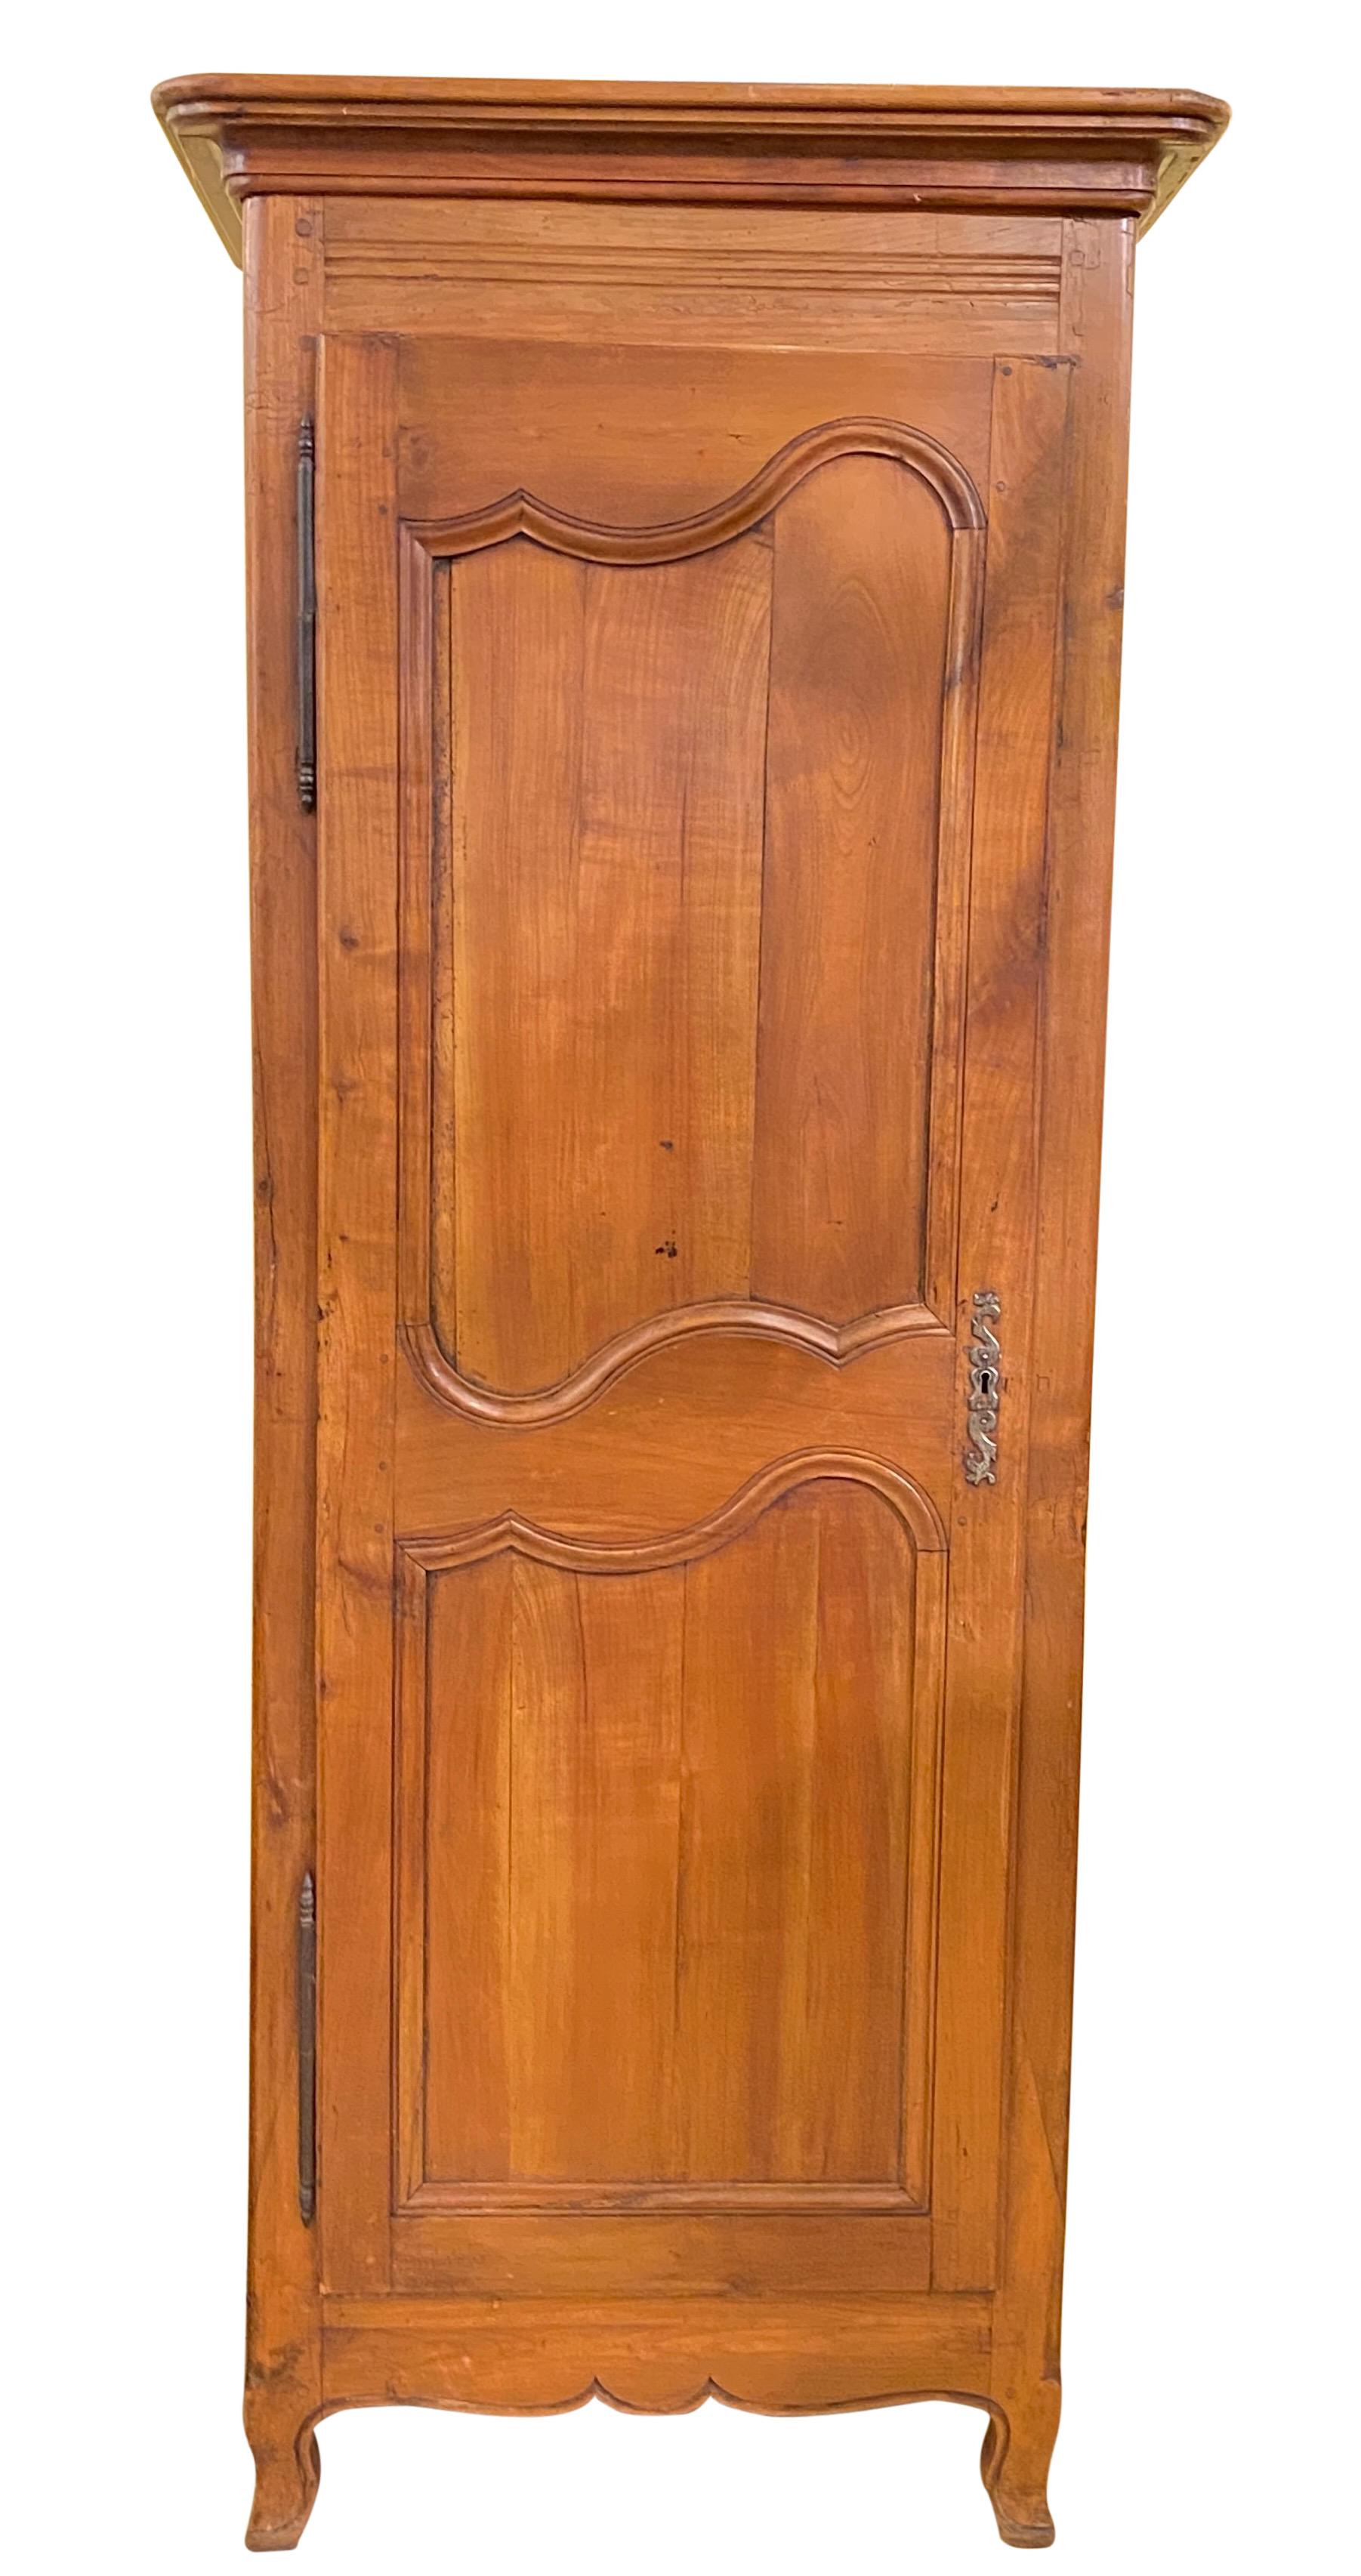 18th Century French Cherry Wood Bonnetiere Hat Cabinet For Sale 1